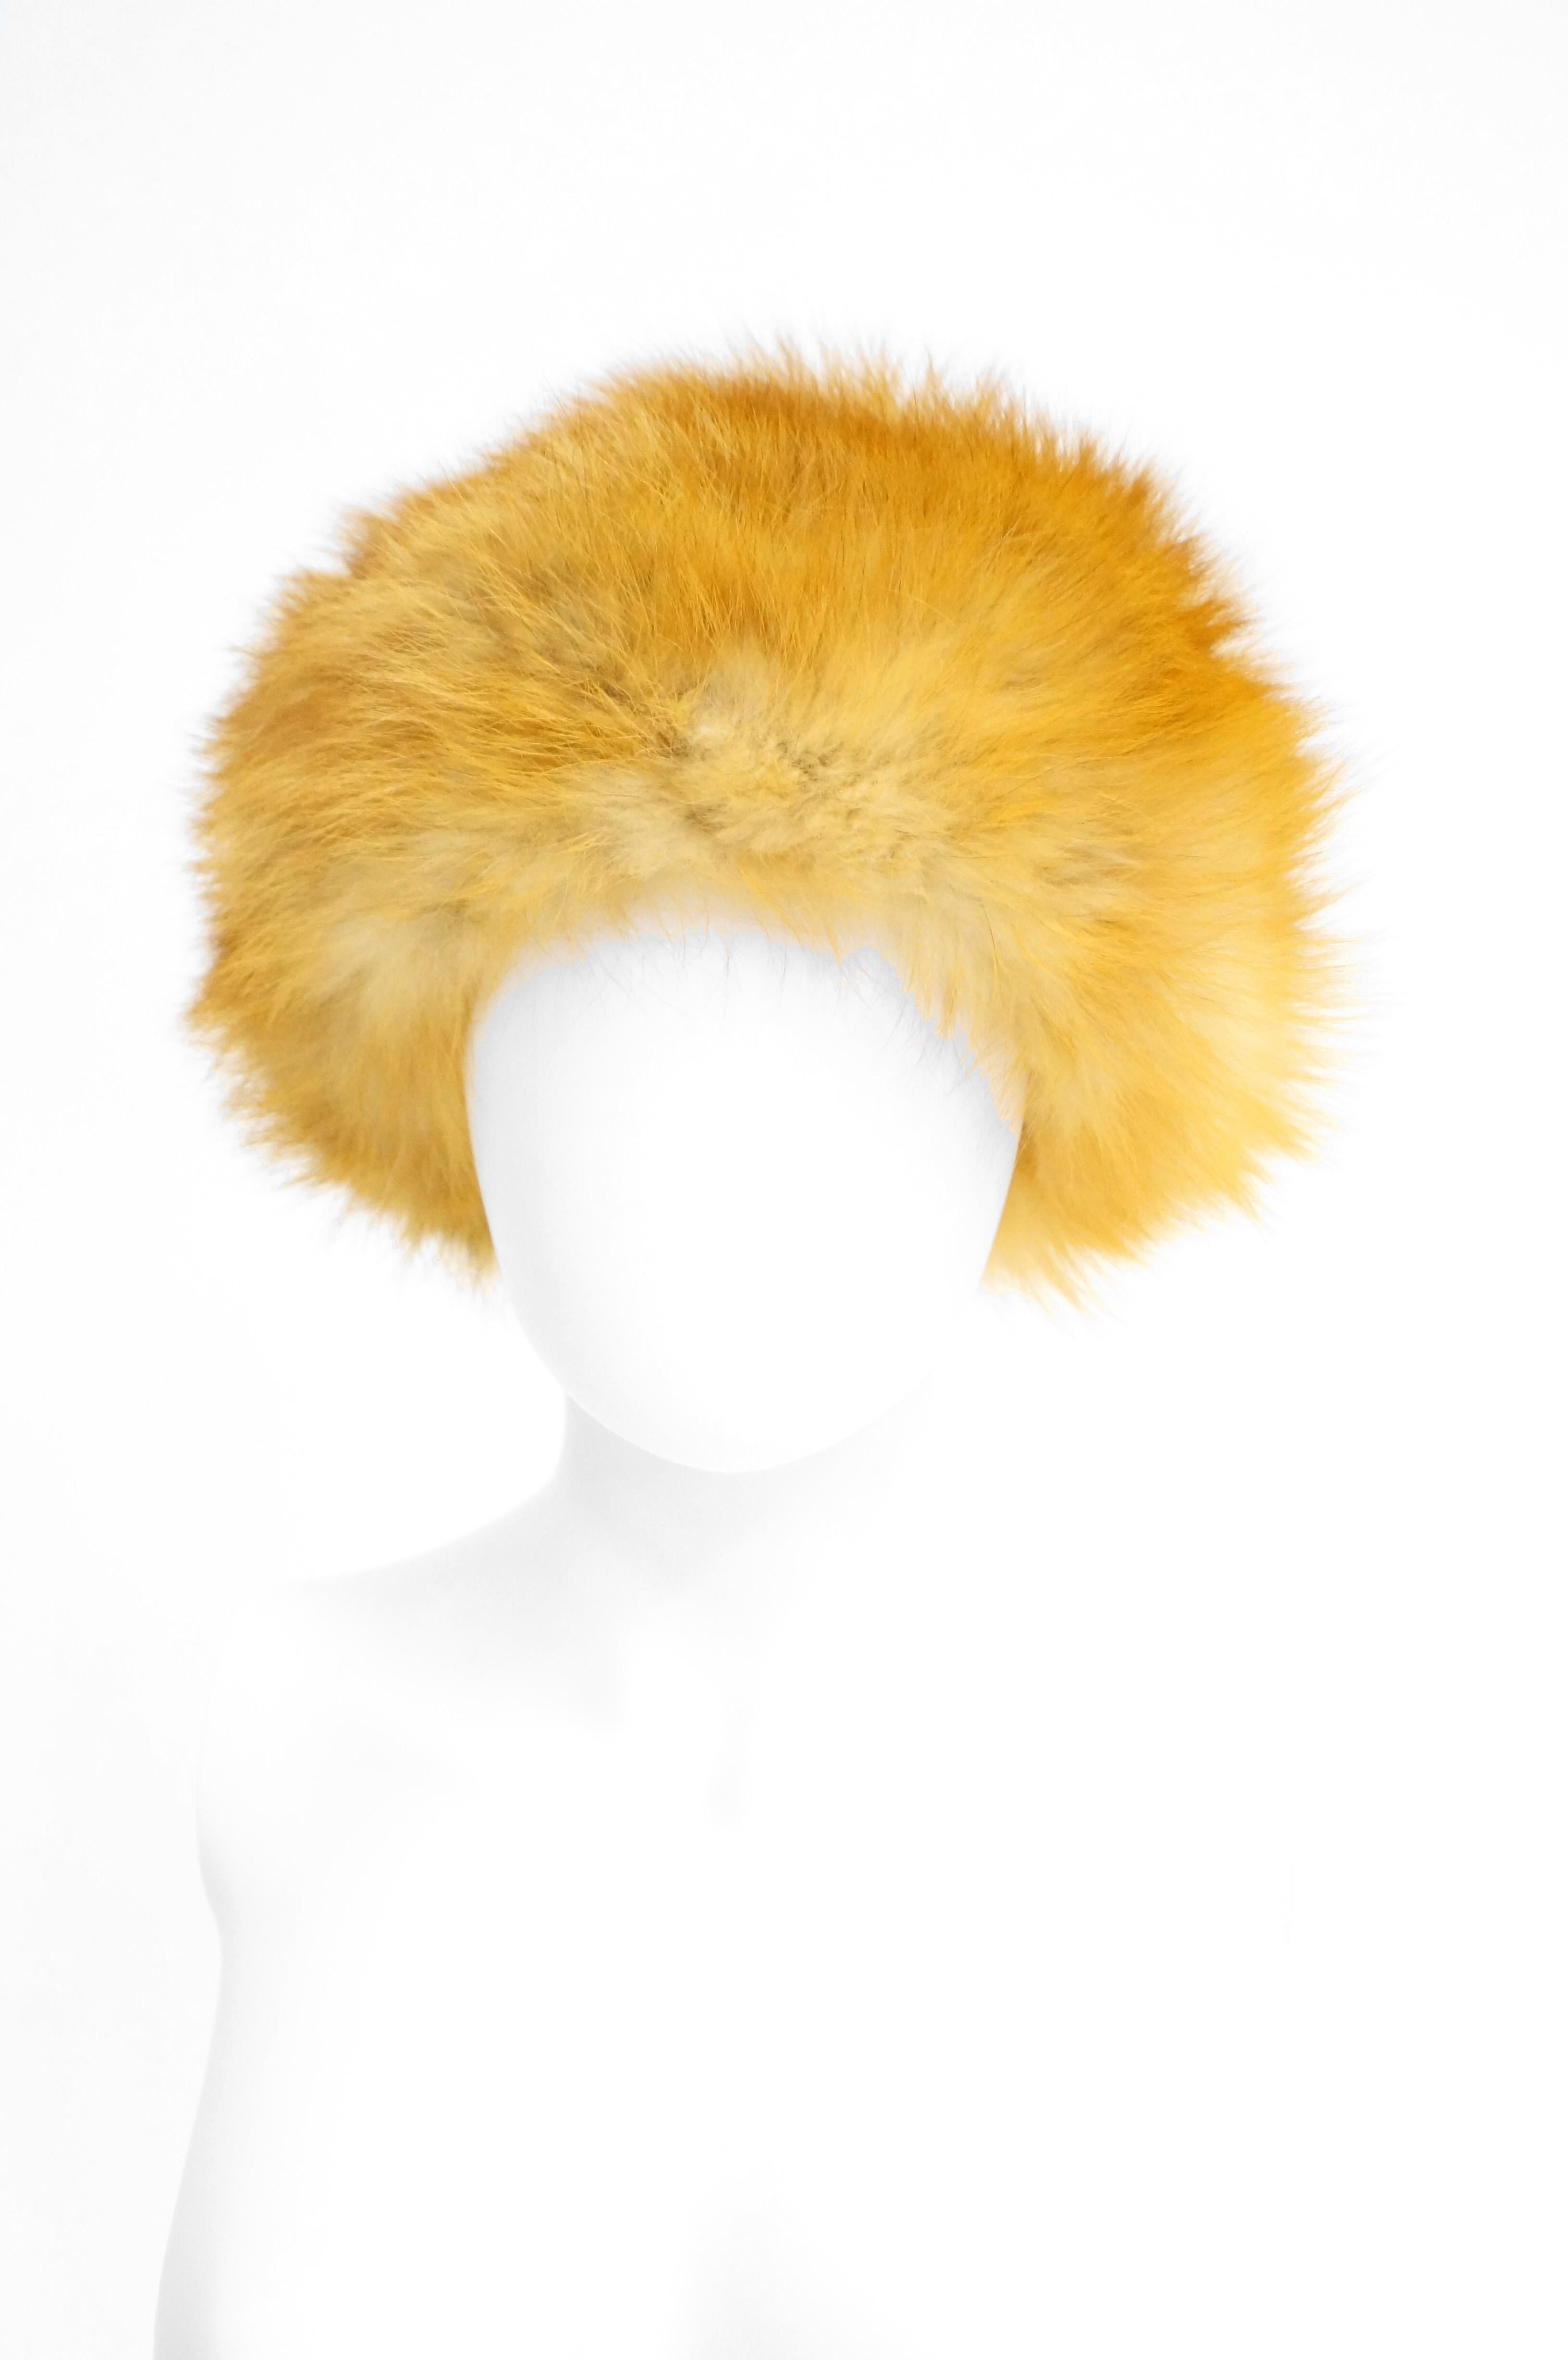 Amazing, luxurious golden fox fur cap! This hat is wonderfully plush, with long brushed fox fur that spreads out evenly throughout. Cap is lined in black satin. 